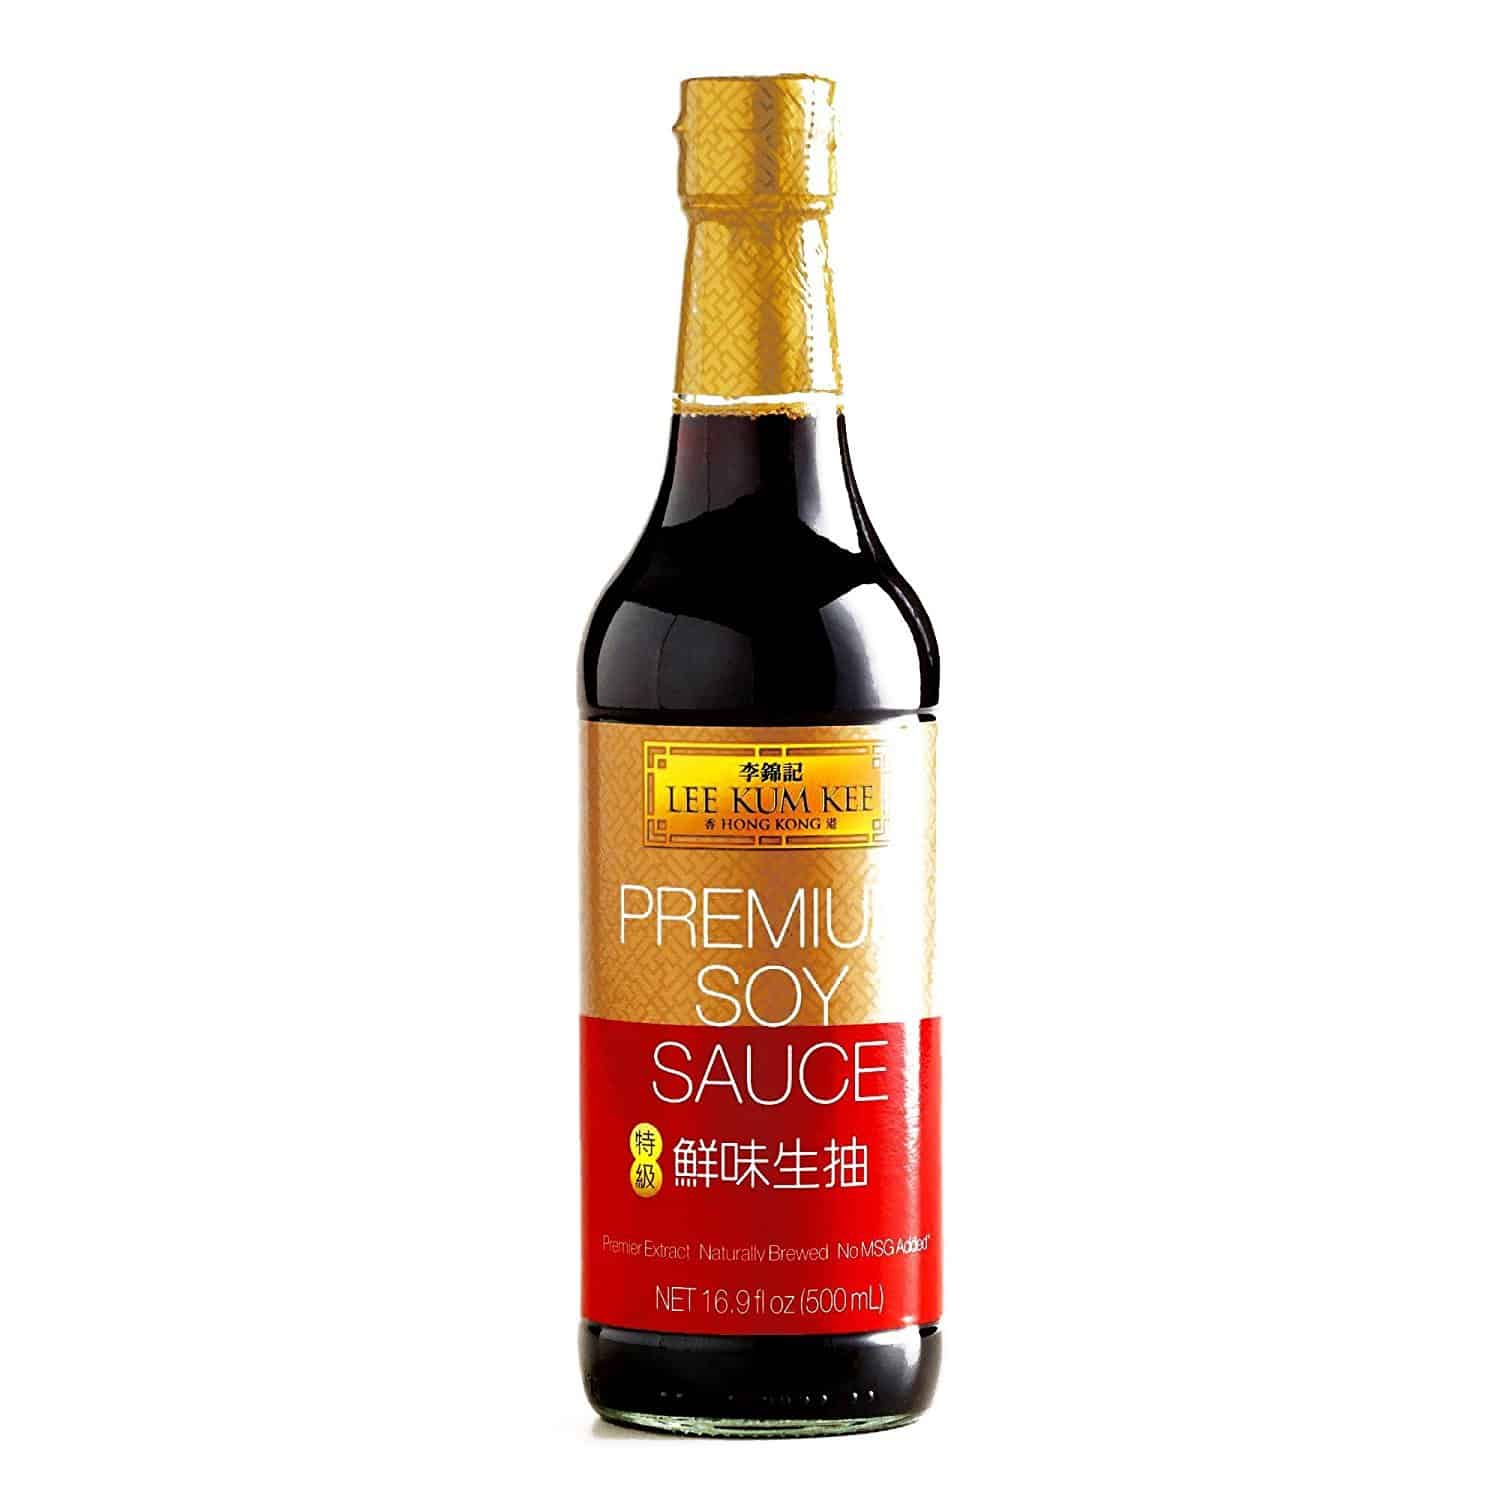 Best light soy sauce for fried rice- Lee Kum Kee Premium Soy Sauce